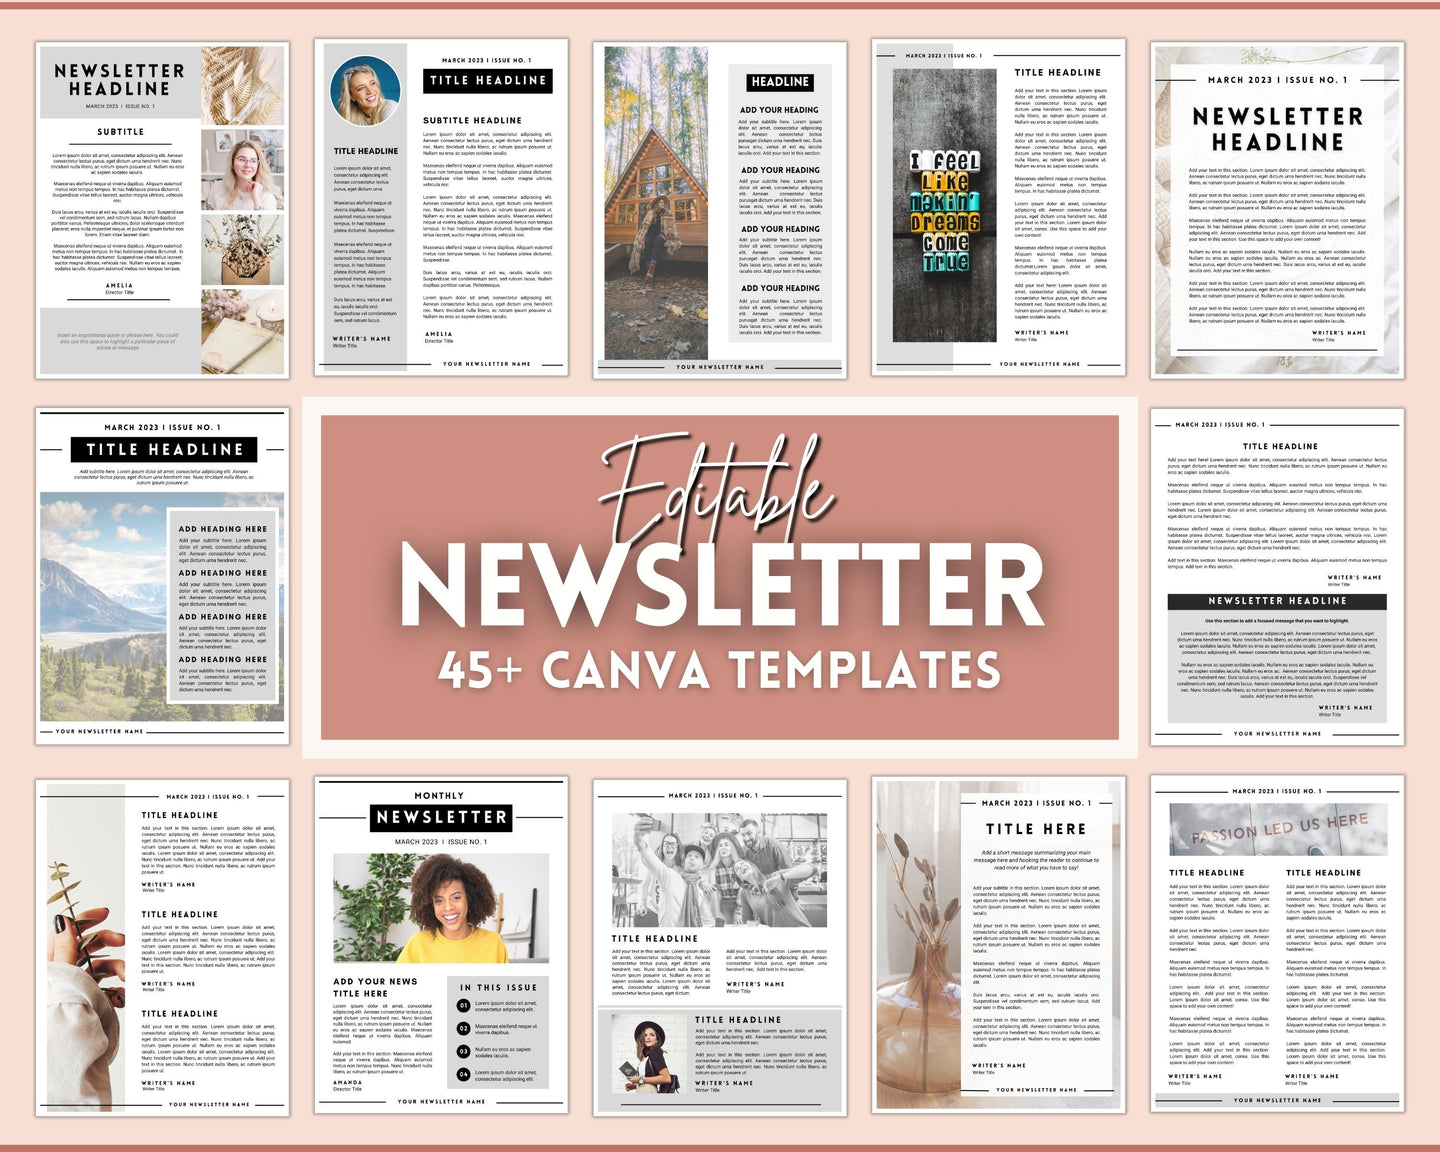 Newsletter Template for Businesses, Real Estate, Newspapers, Relief Society, Nonprofits & Schools | 45+ Editable Canva Templates